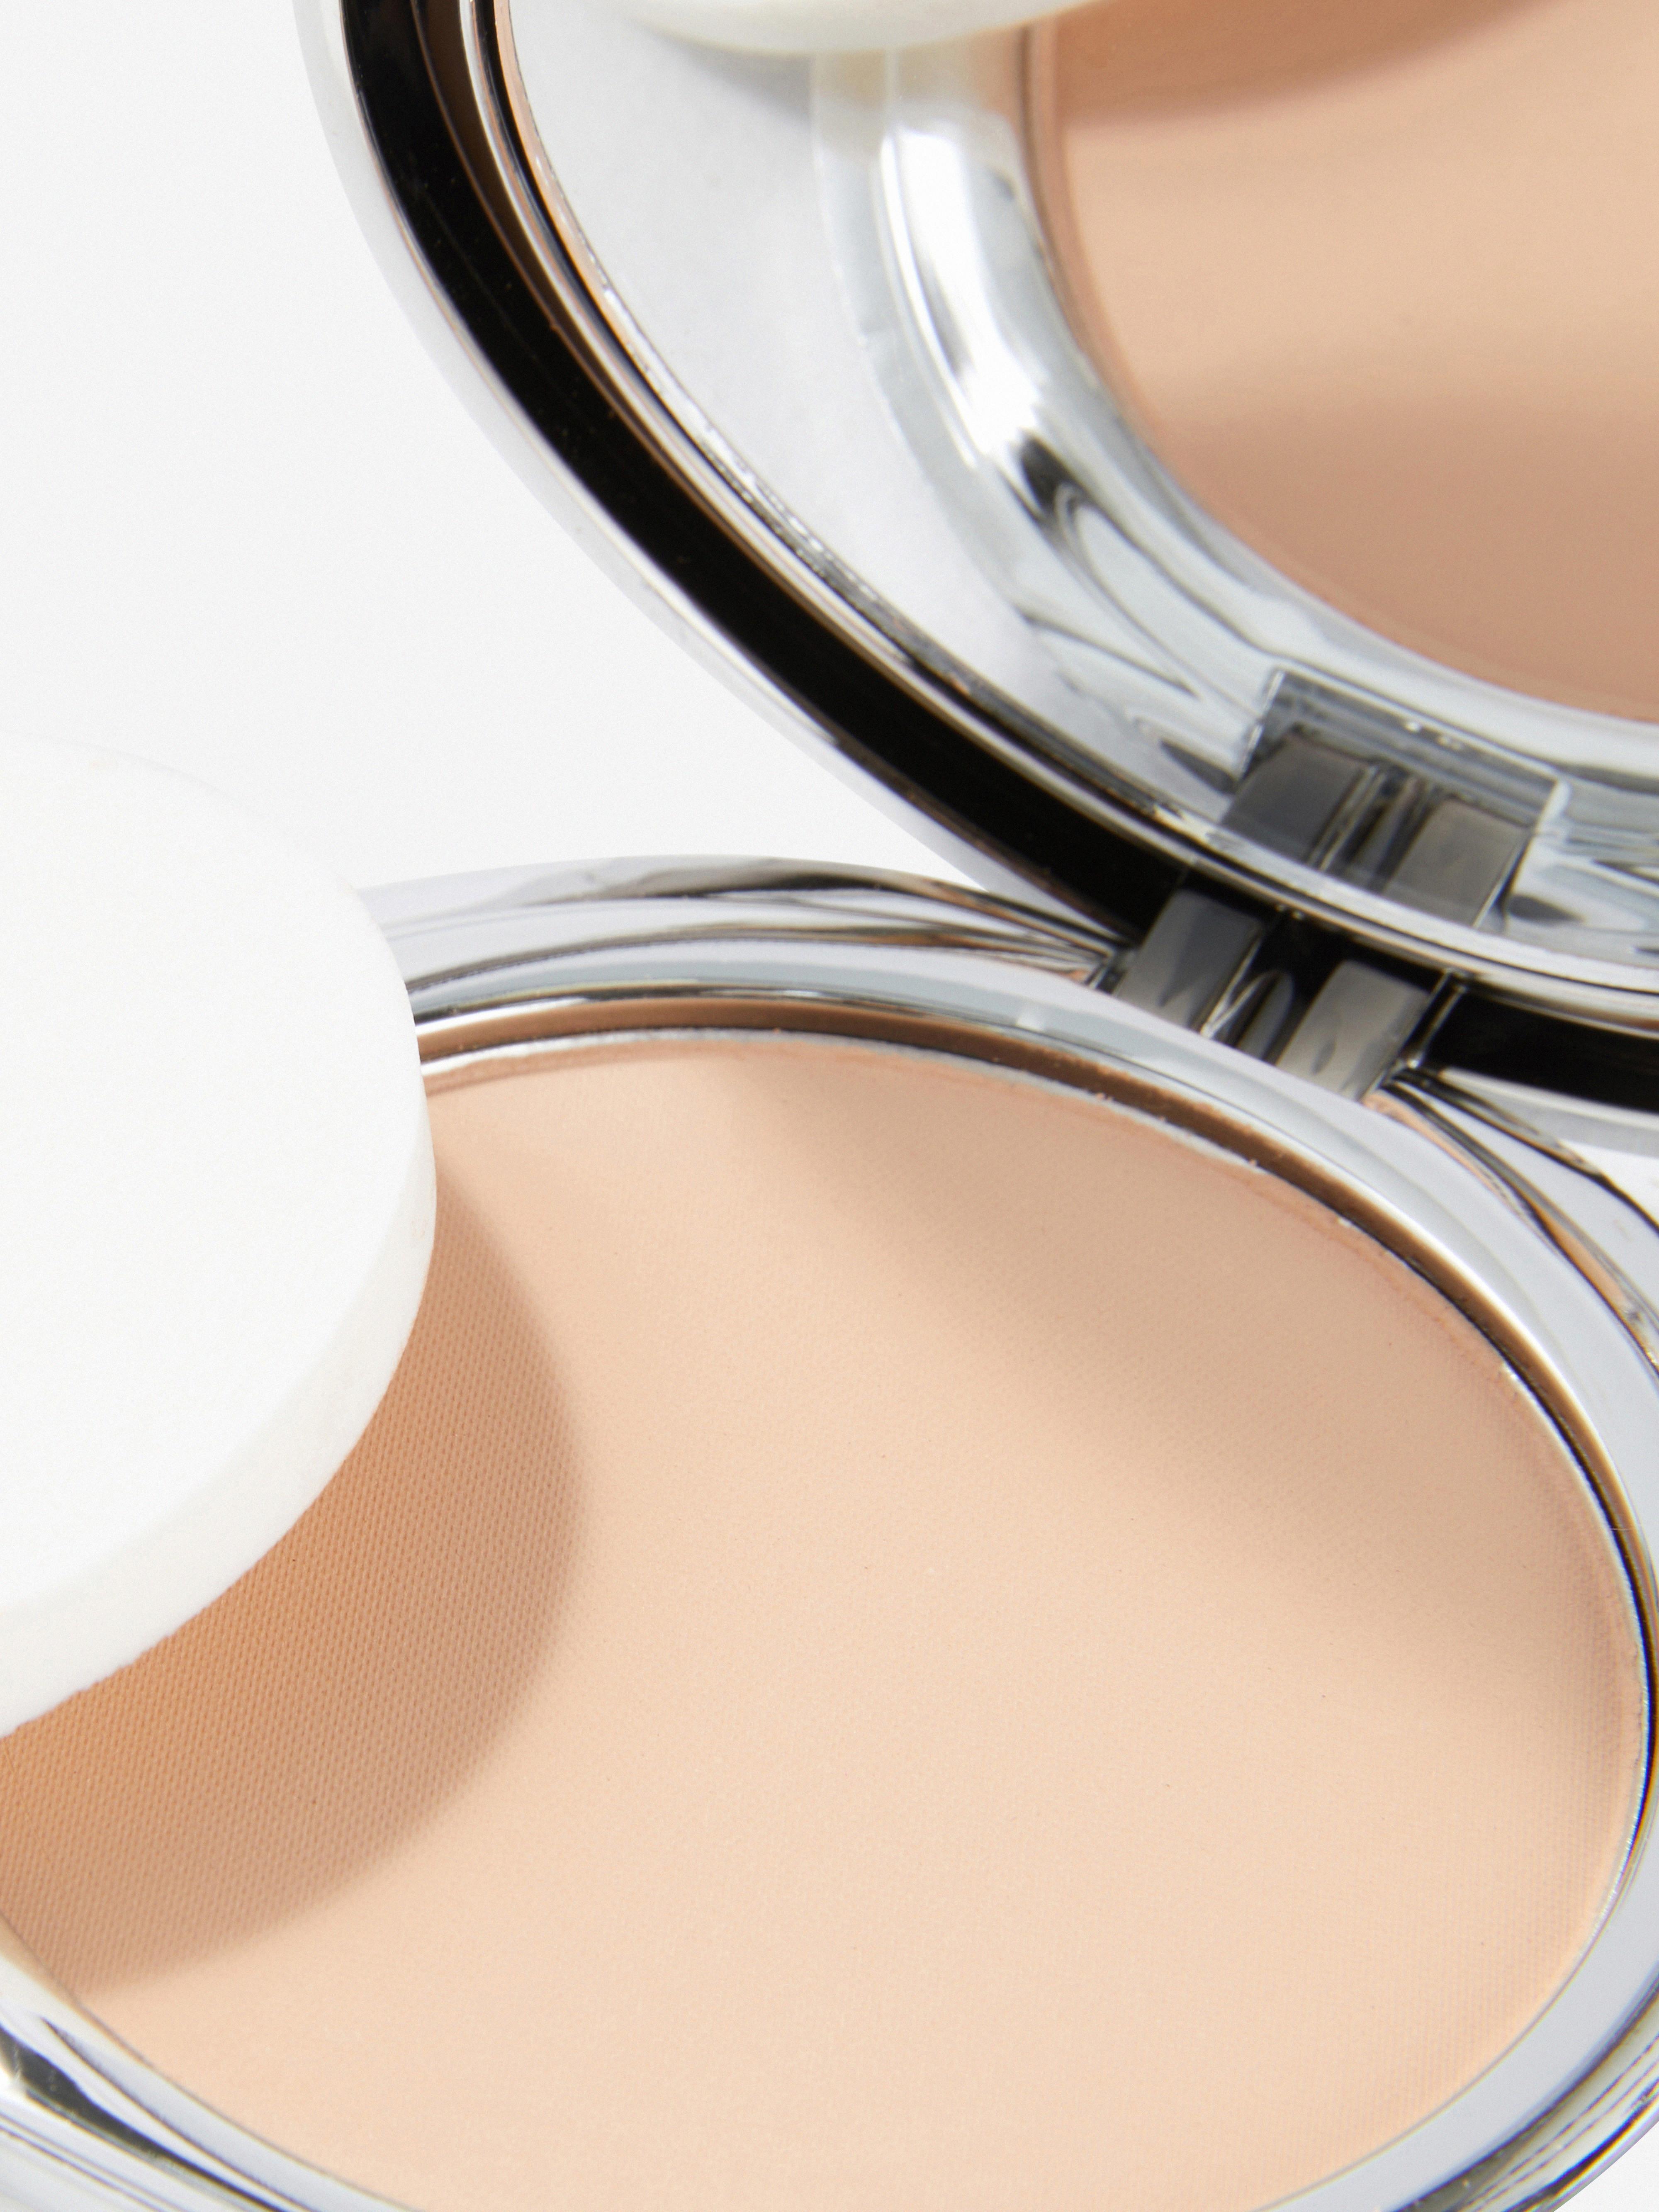 PS… My Perfect Colour Foundation Pressed Powder